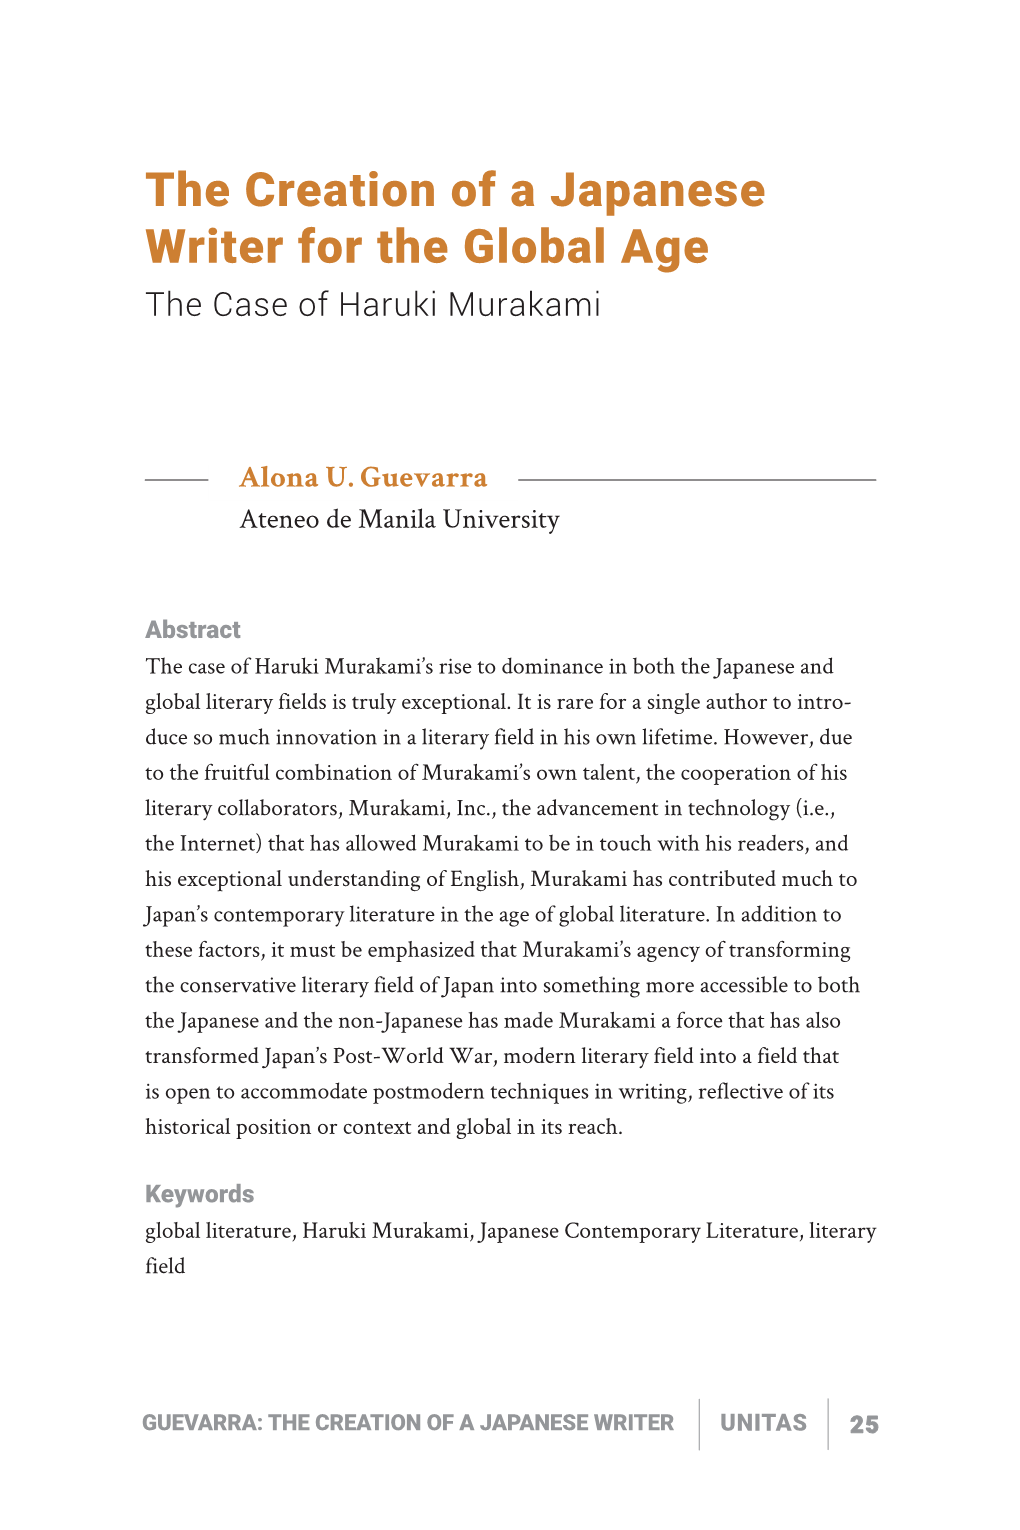 The Creation of a Japanese Writer for the Global Age: the Case of Haruki